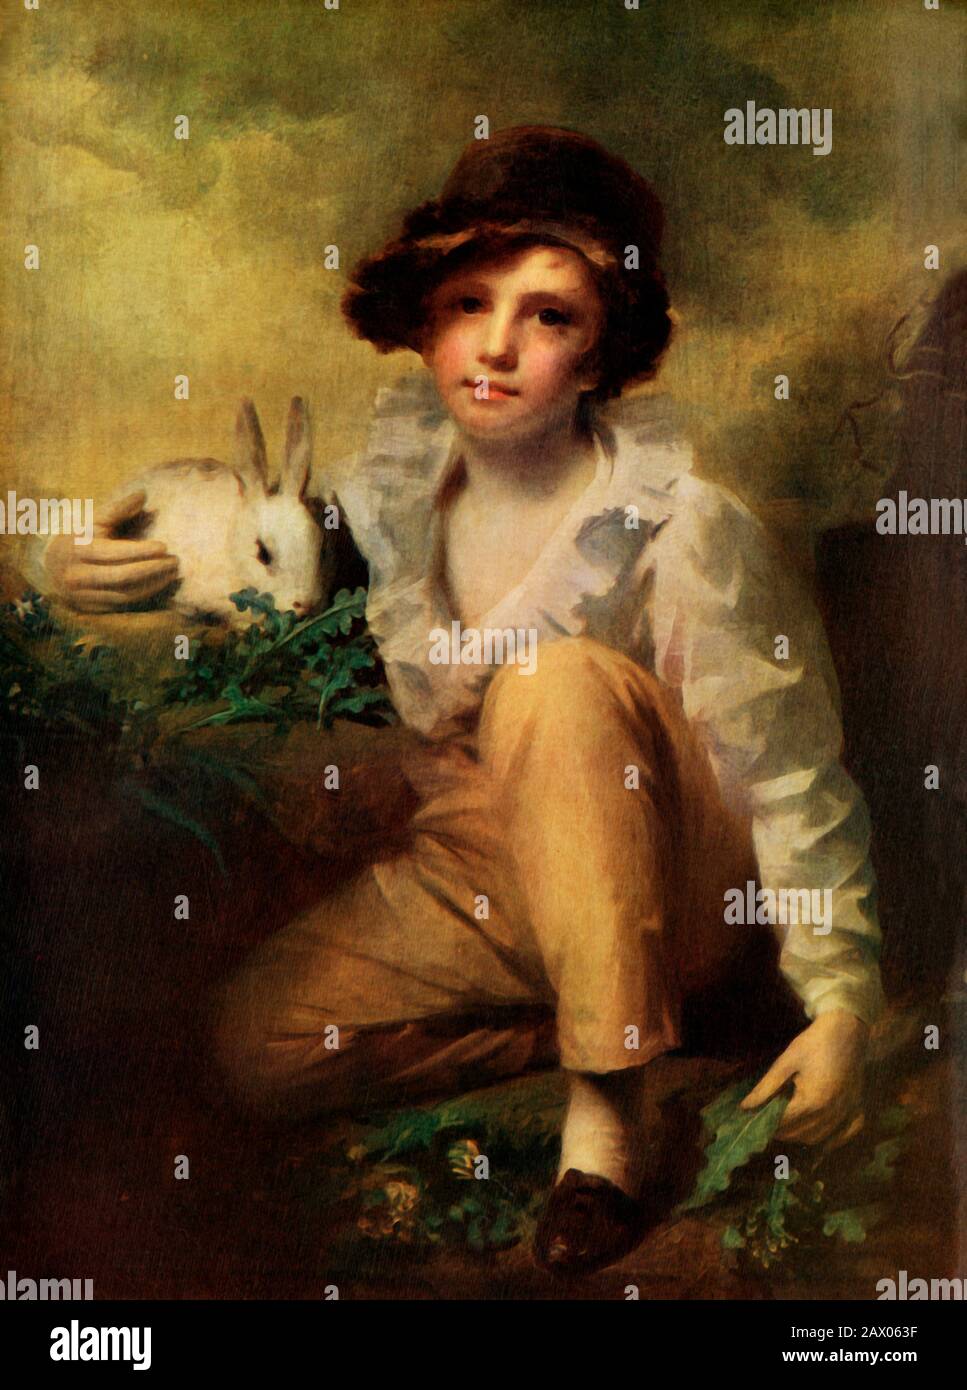 'Boy with Rabbit', c1814, (1924). Henry Raeburn Inglis, godson and step-grandson of the artist is show with a protective arm round a rabbit. OIl on canvas. From &quot;Henry Raeburn - Cassell's Gems of Art&quot;, by T.C.F. Brotchie. [Cassell &amp; Company, Limited, London, 1924] Stock Photo